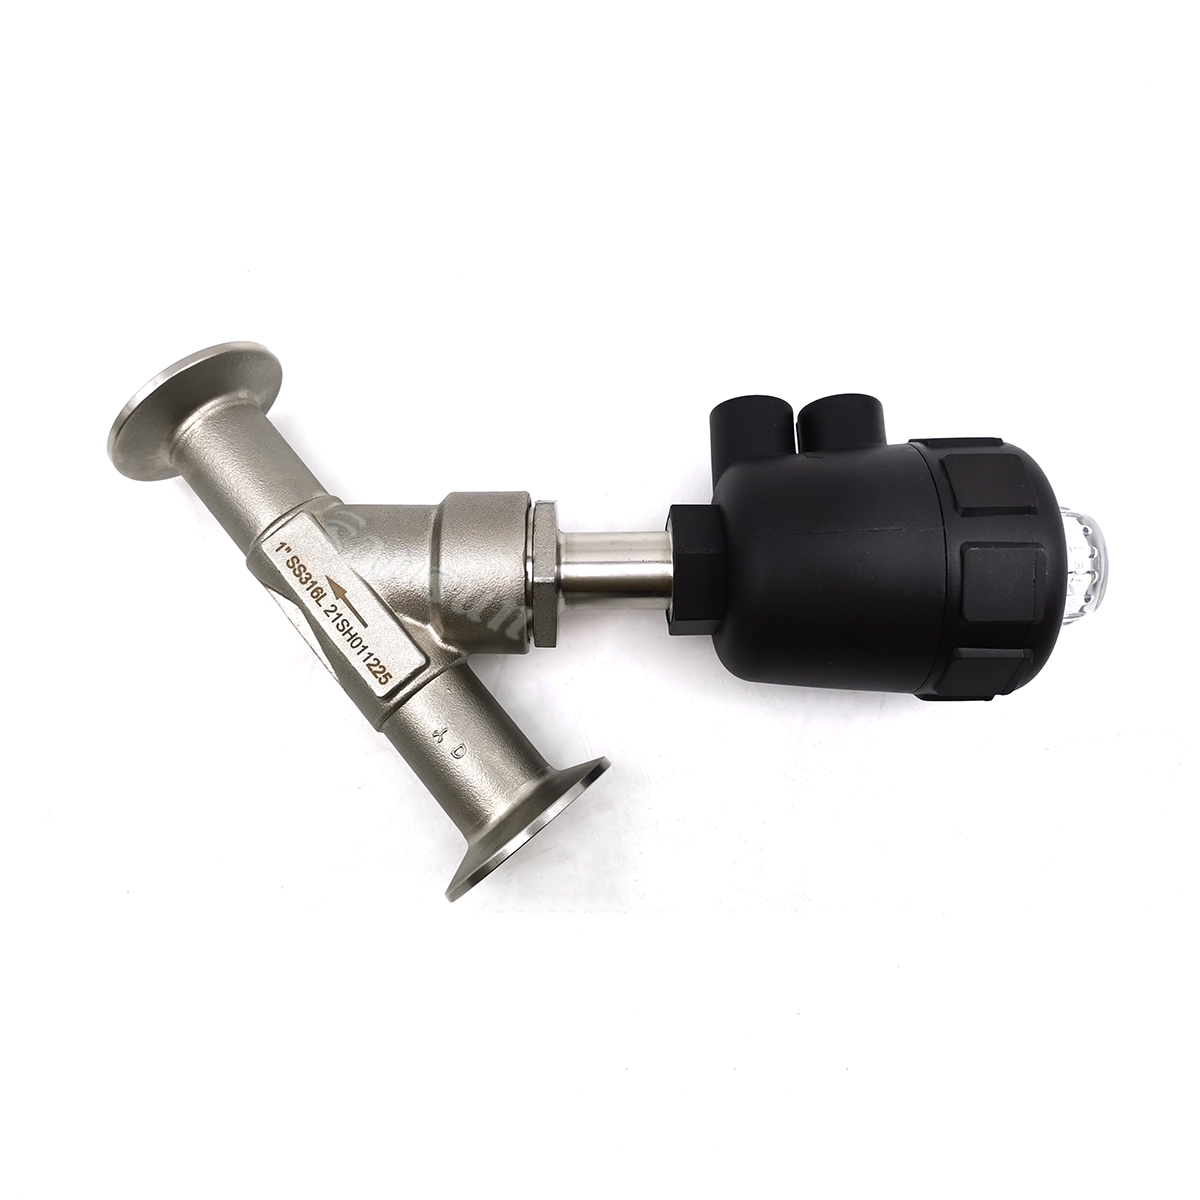 Sanitary Tri-clamp Y Type Angle Seat Valve with Plastic Actuator